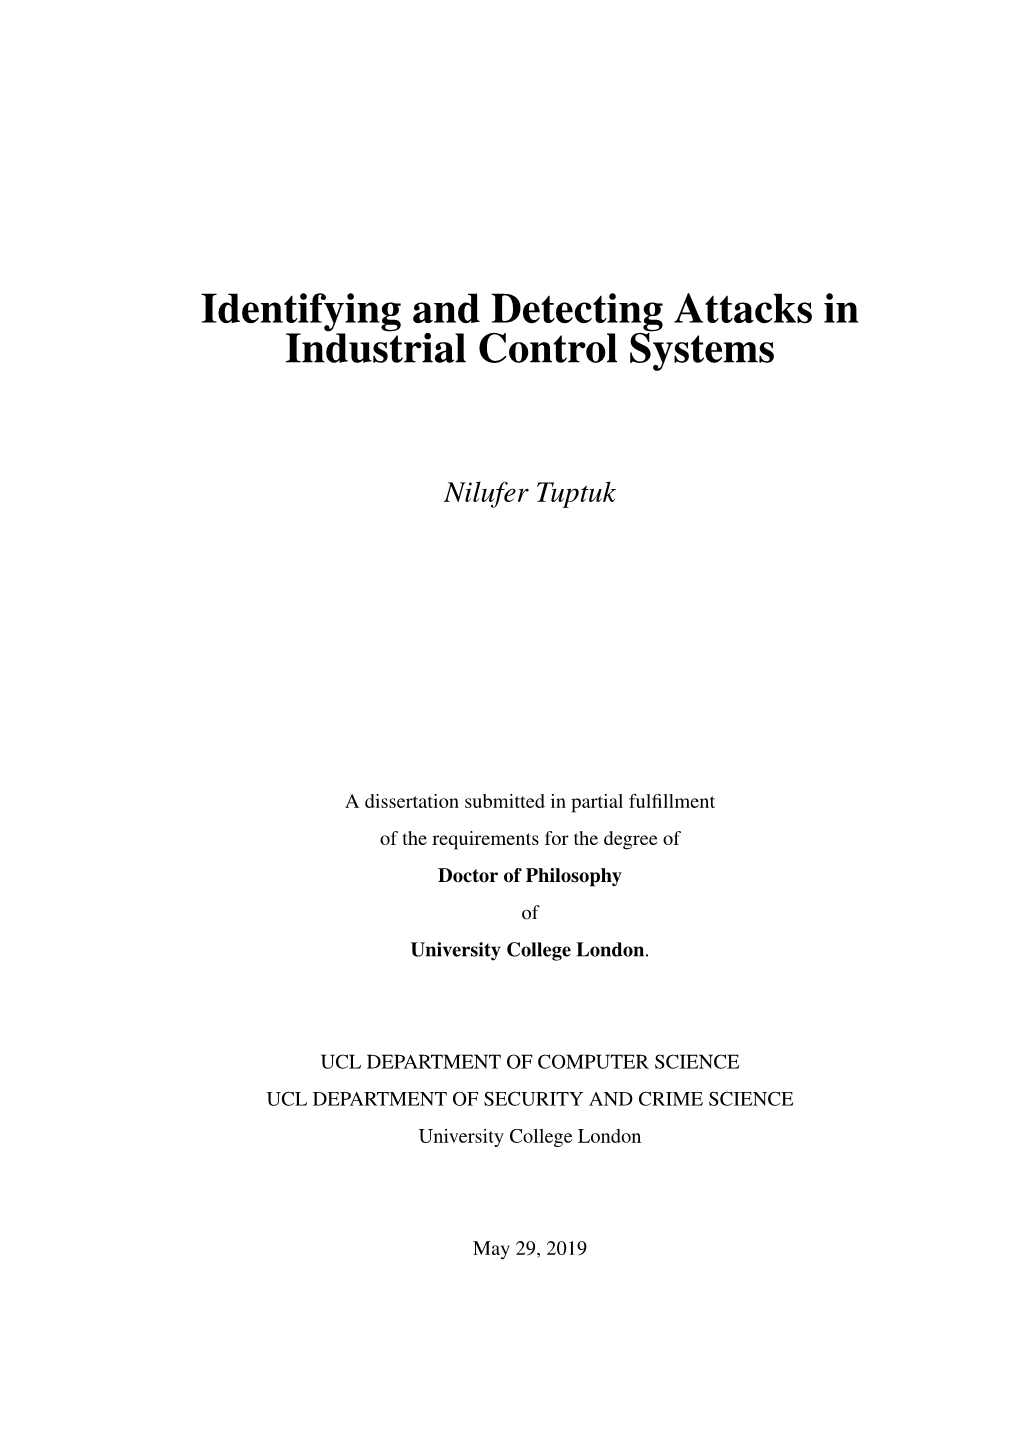 Identifying and Detecting Attacks in Industrial Control Systems